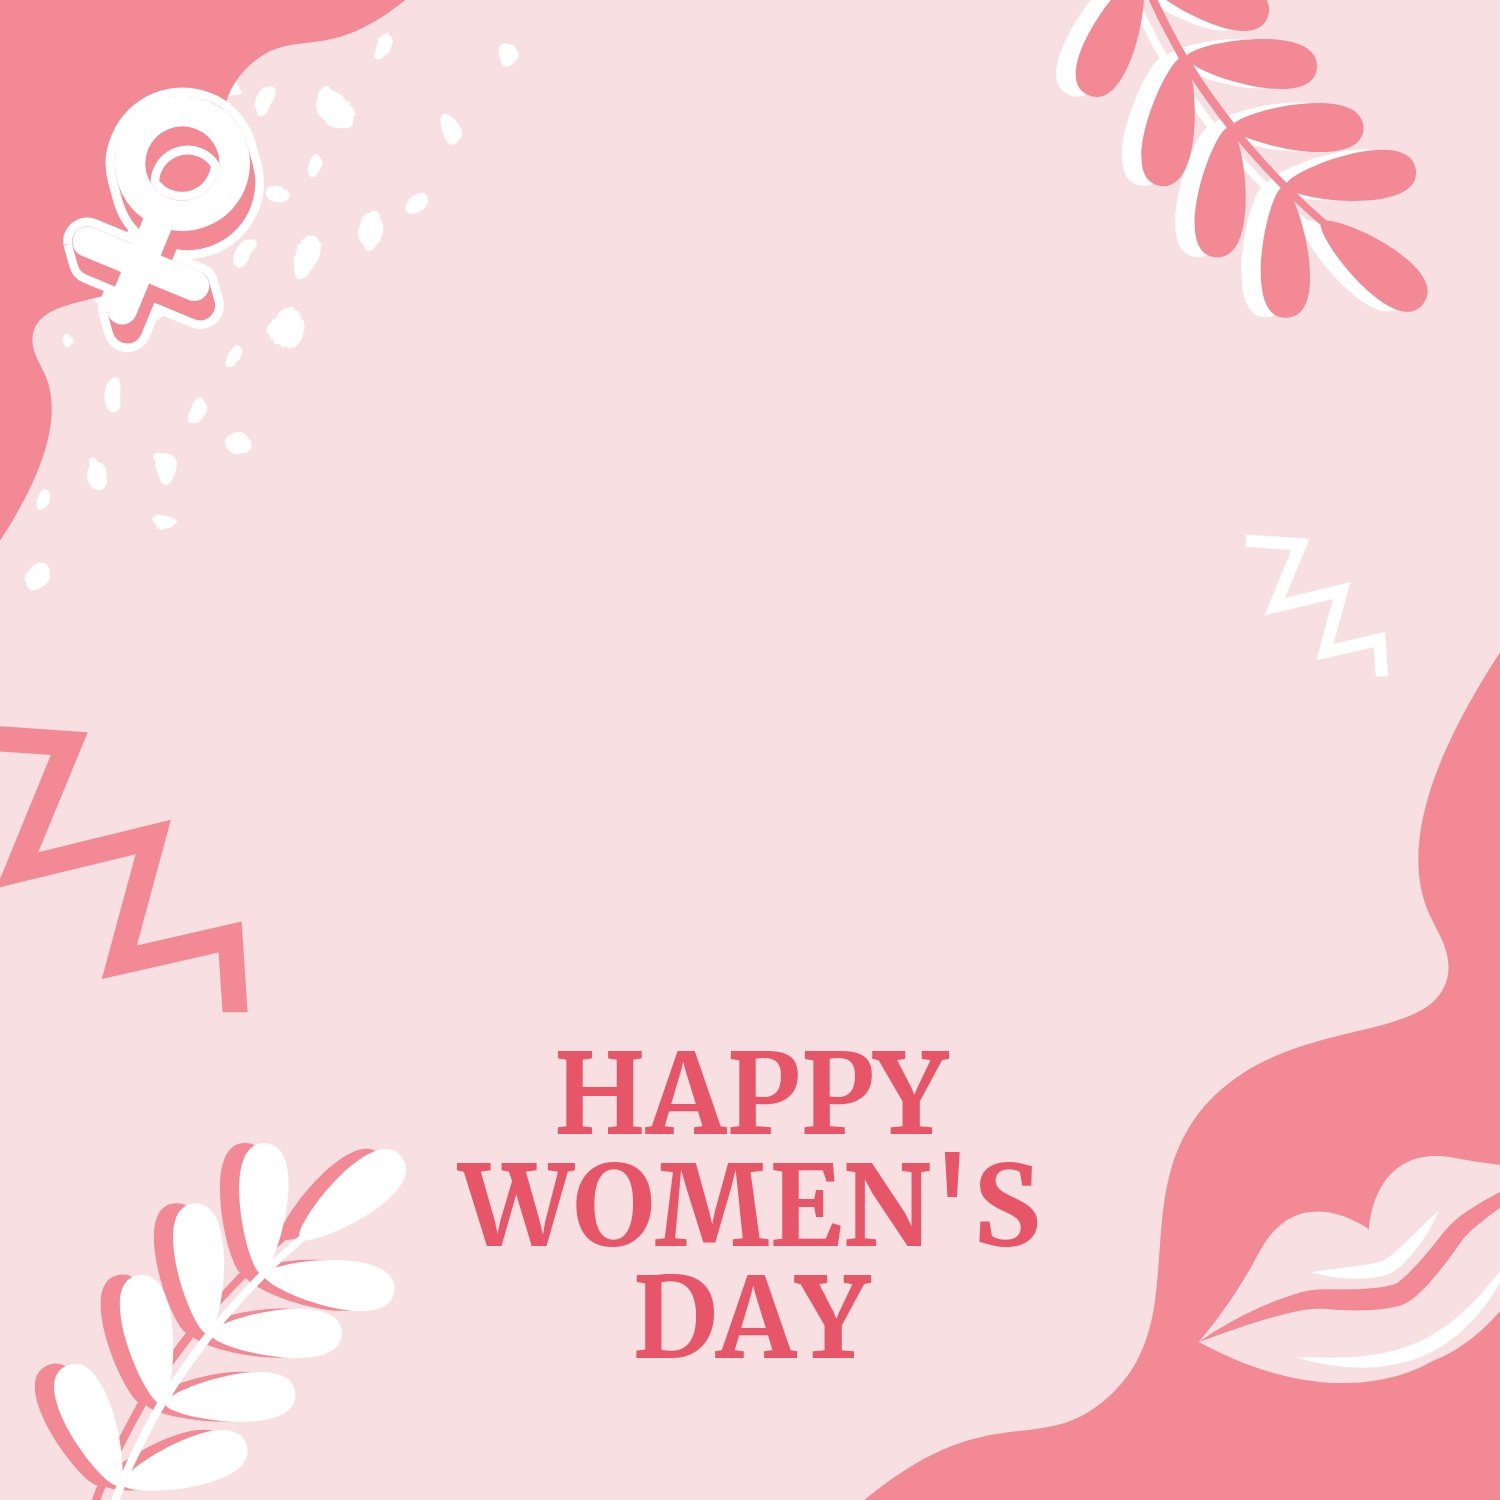 Womens Day Facebook Profile Frame Template